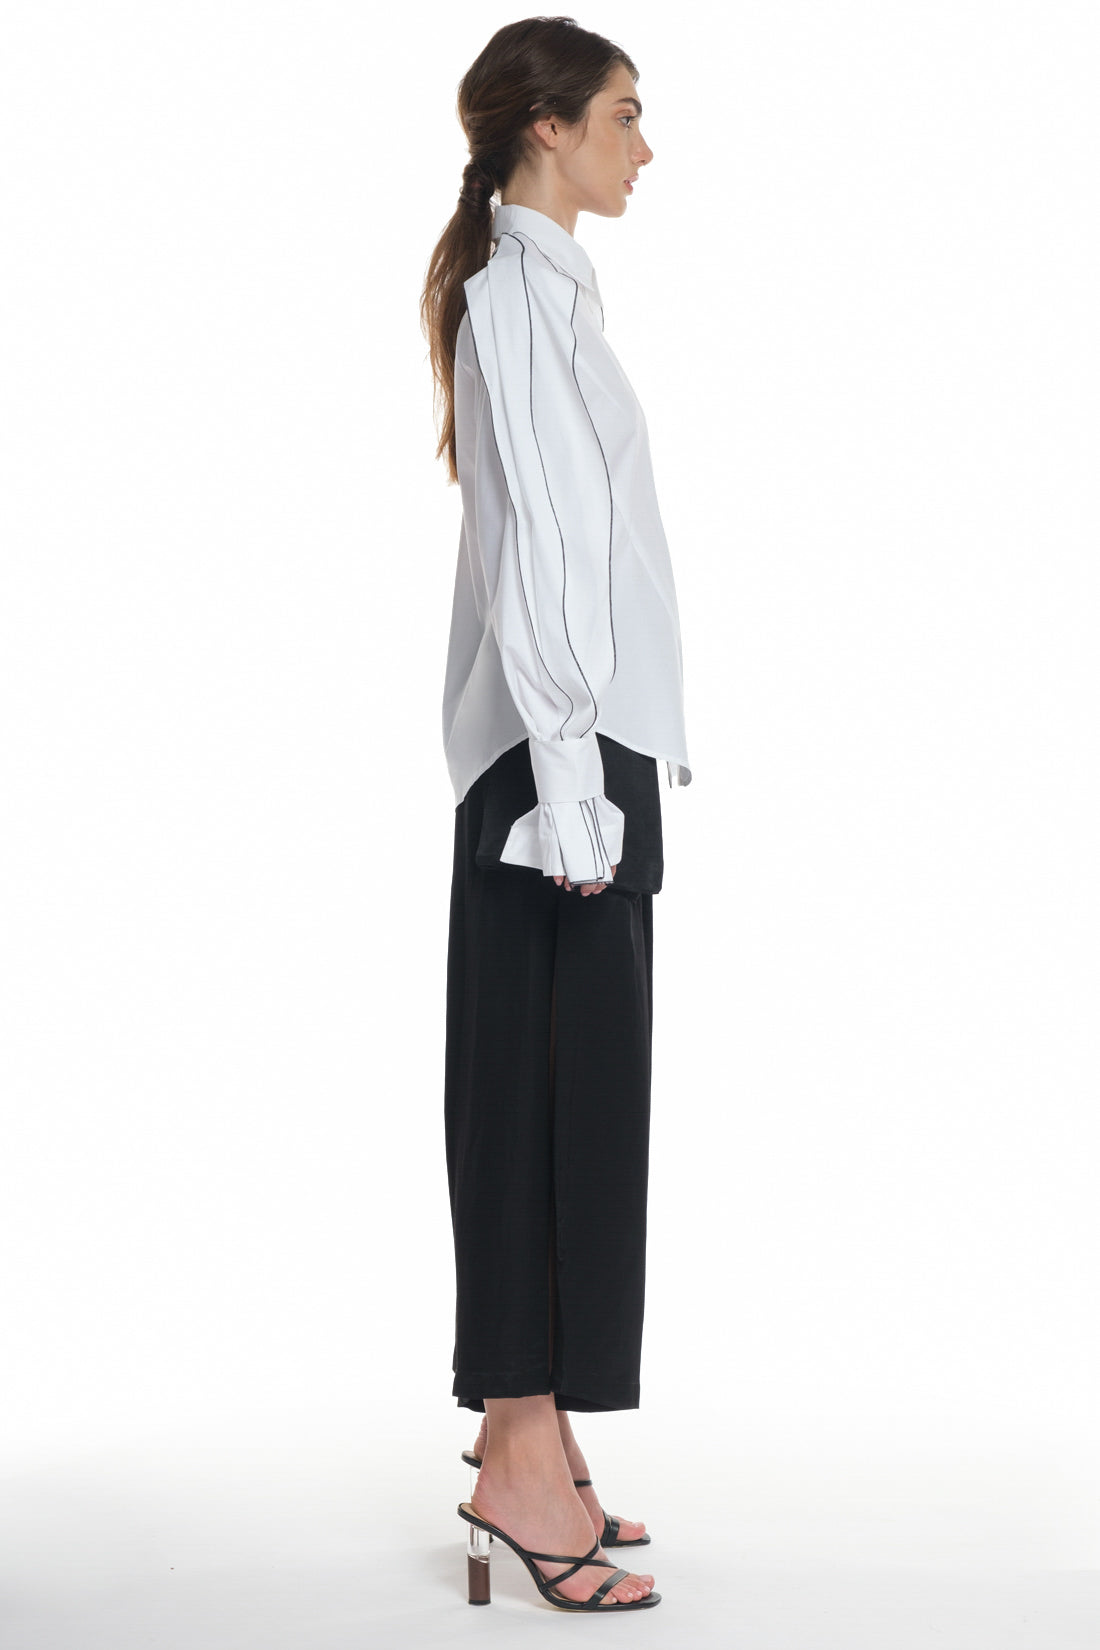 LONG SLEEVE SHIRT WITH BUTTONING ON THE FRONT, HIGH COLLAR, RUFFLED LAYERS ON THE SLEEVES